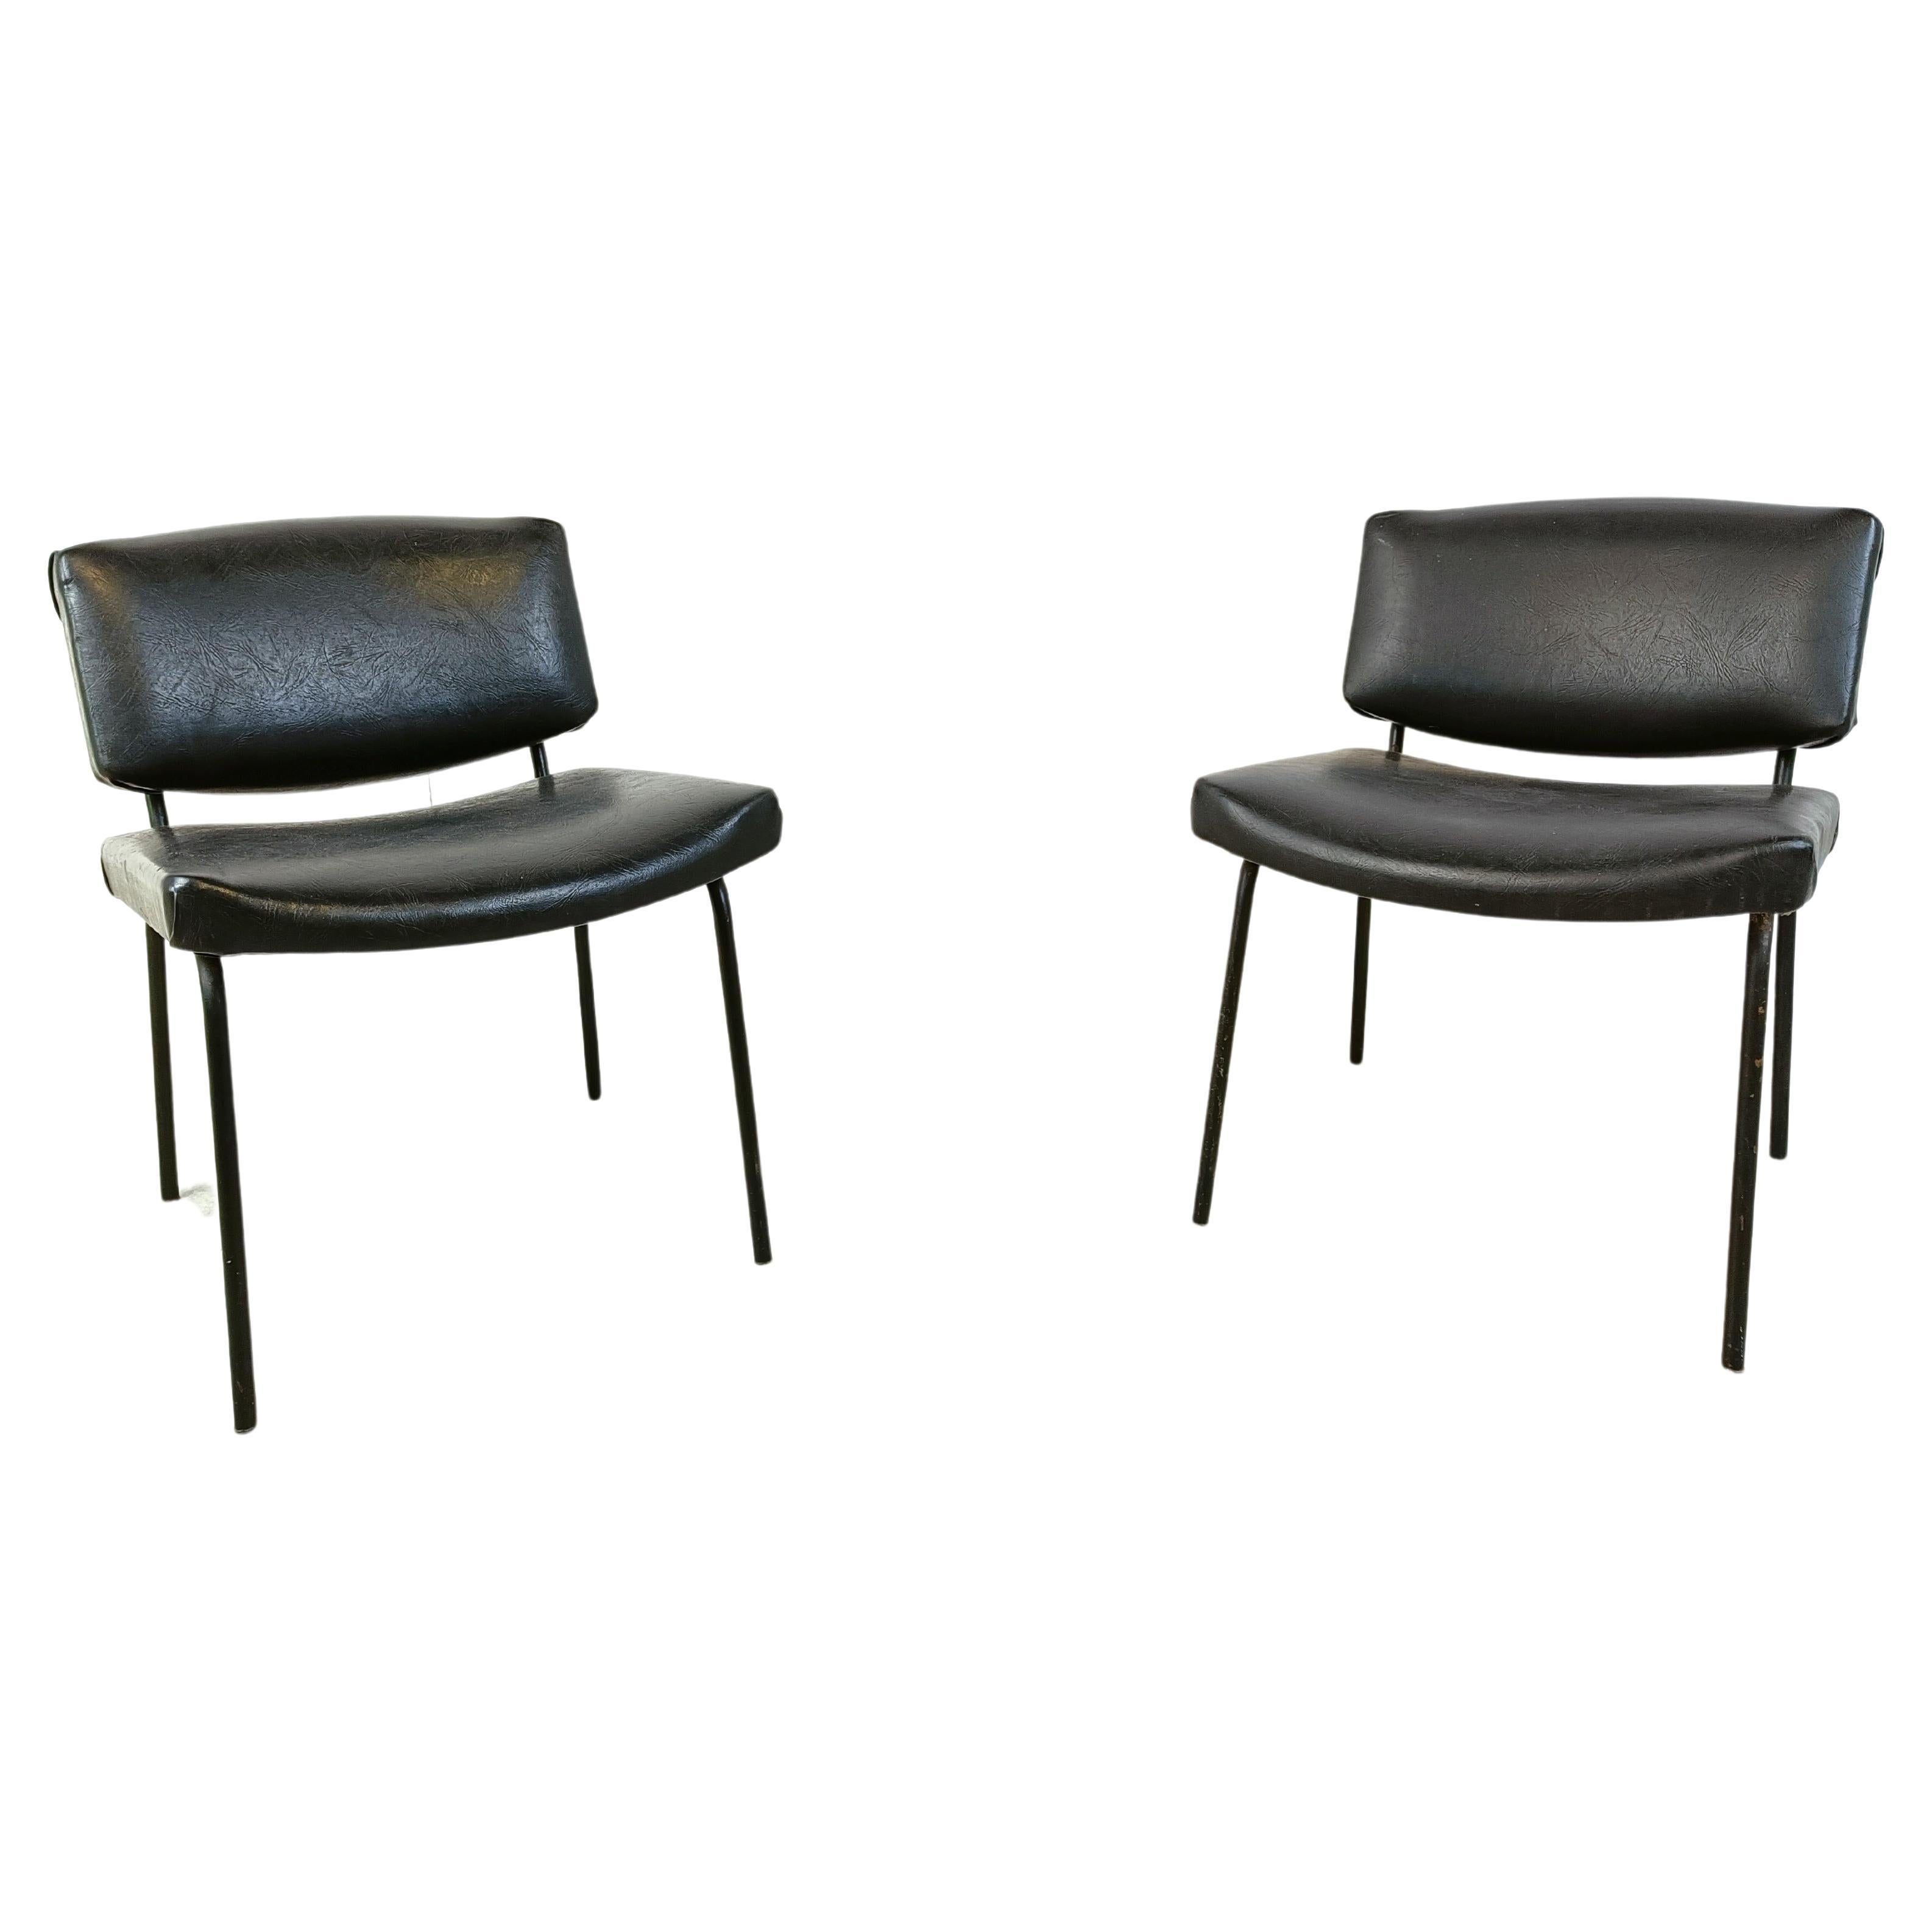 Vintage Conseil Chairs by Pierre Guariche 1950's, France